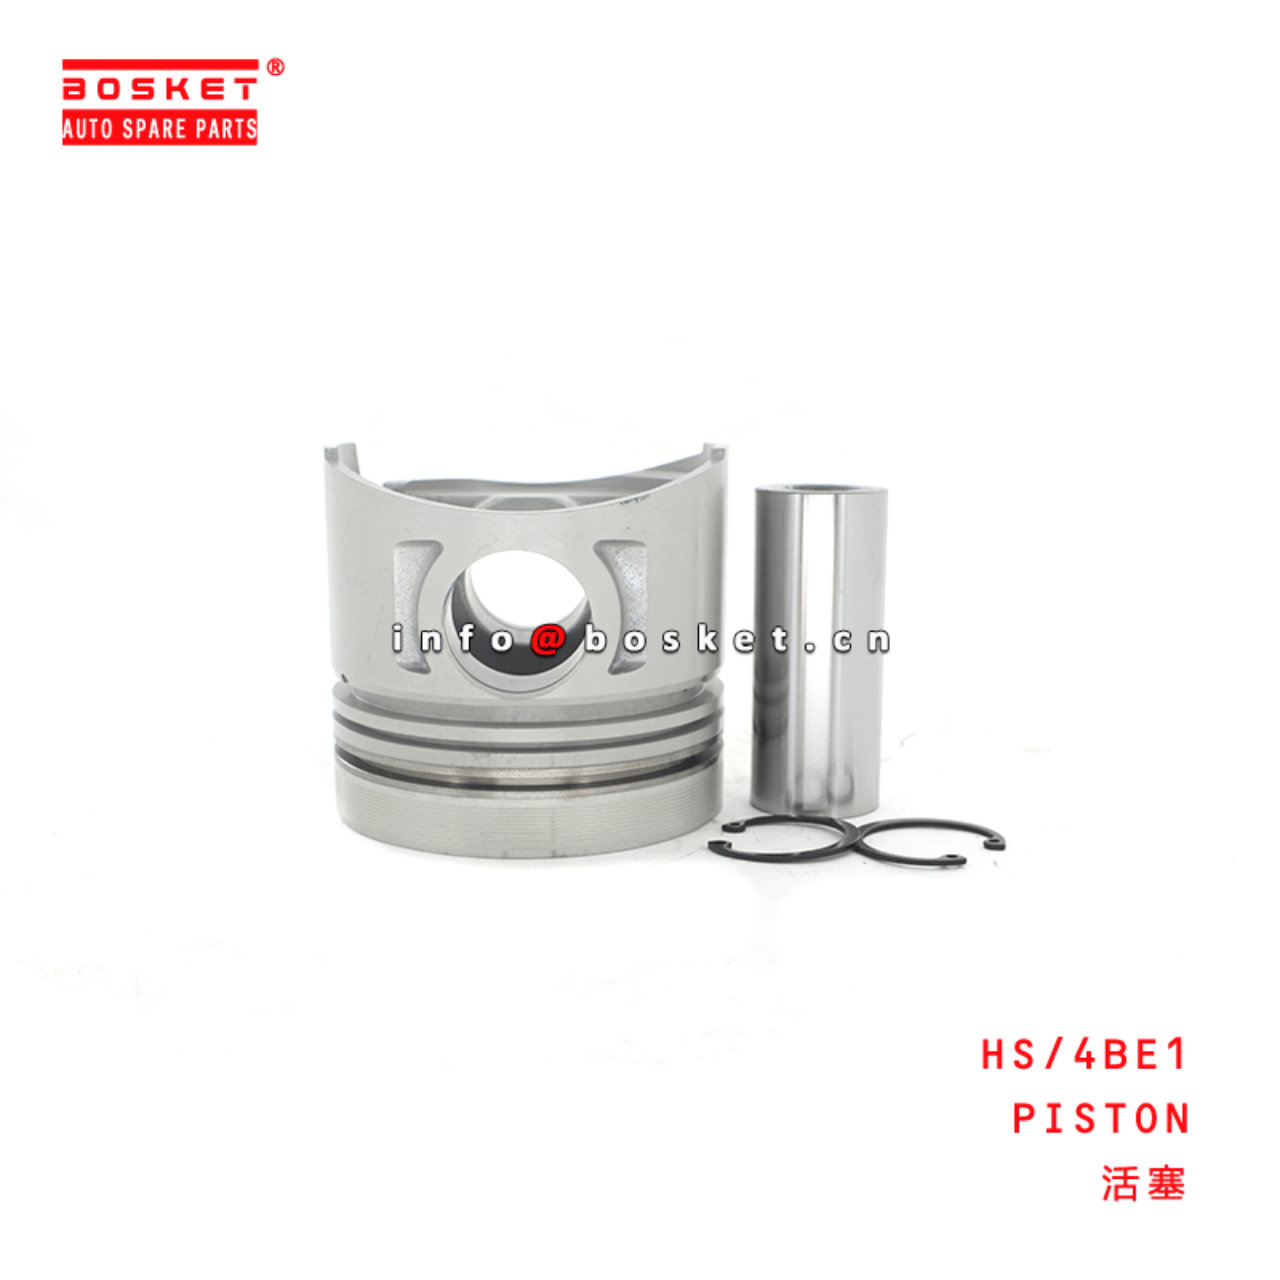 HS/4BE1 Piston Suitable for ISUZU 4BE1 